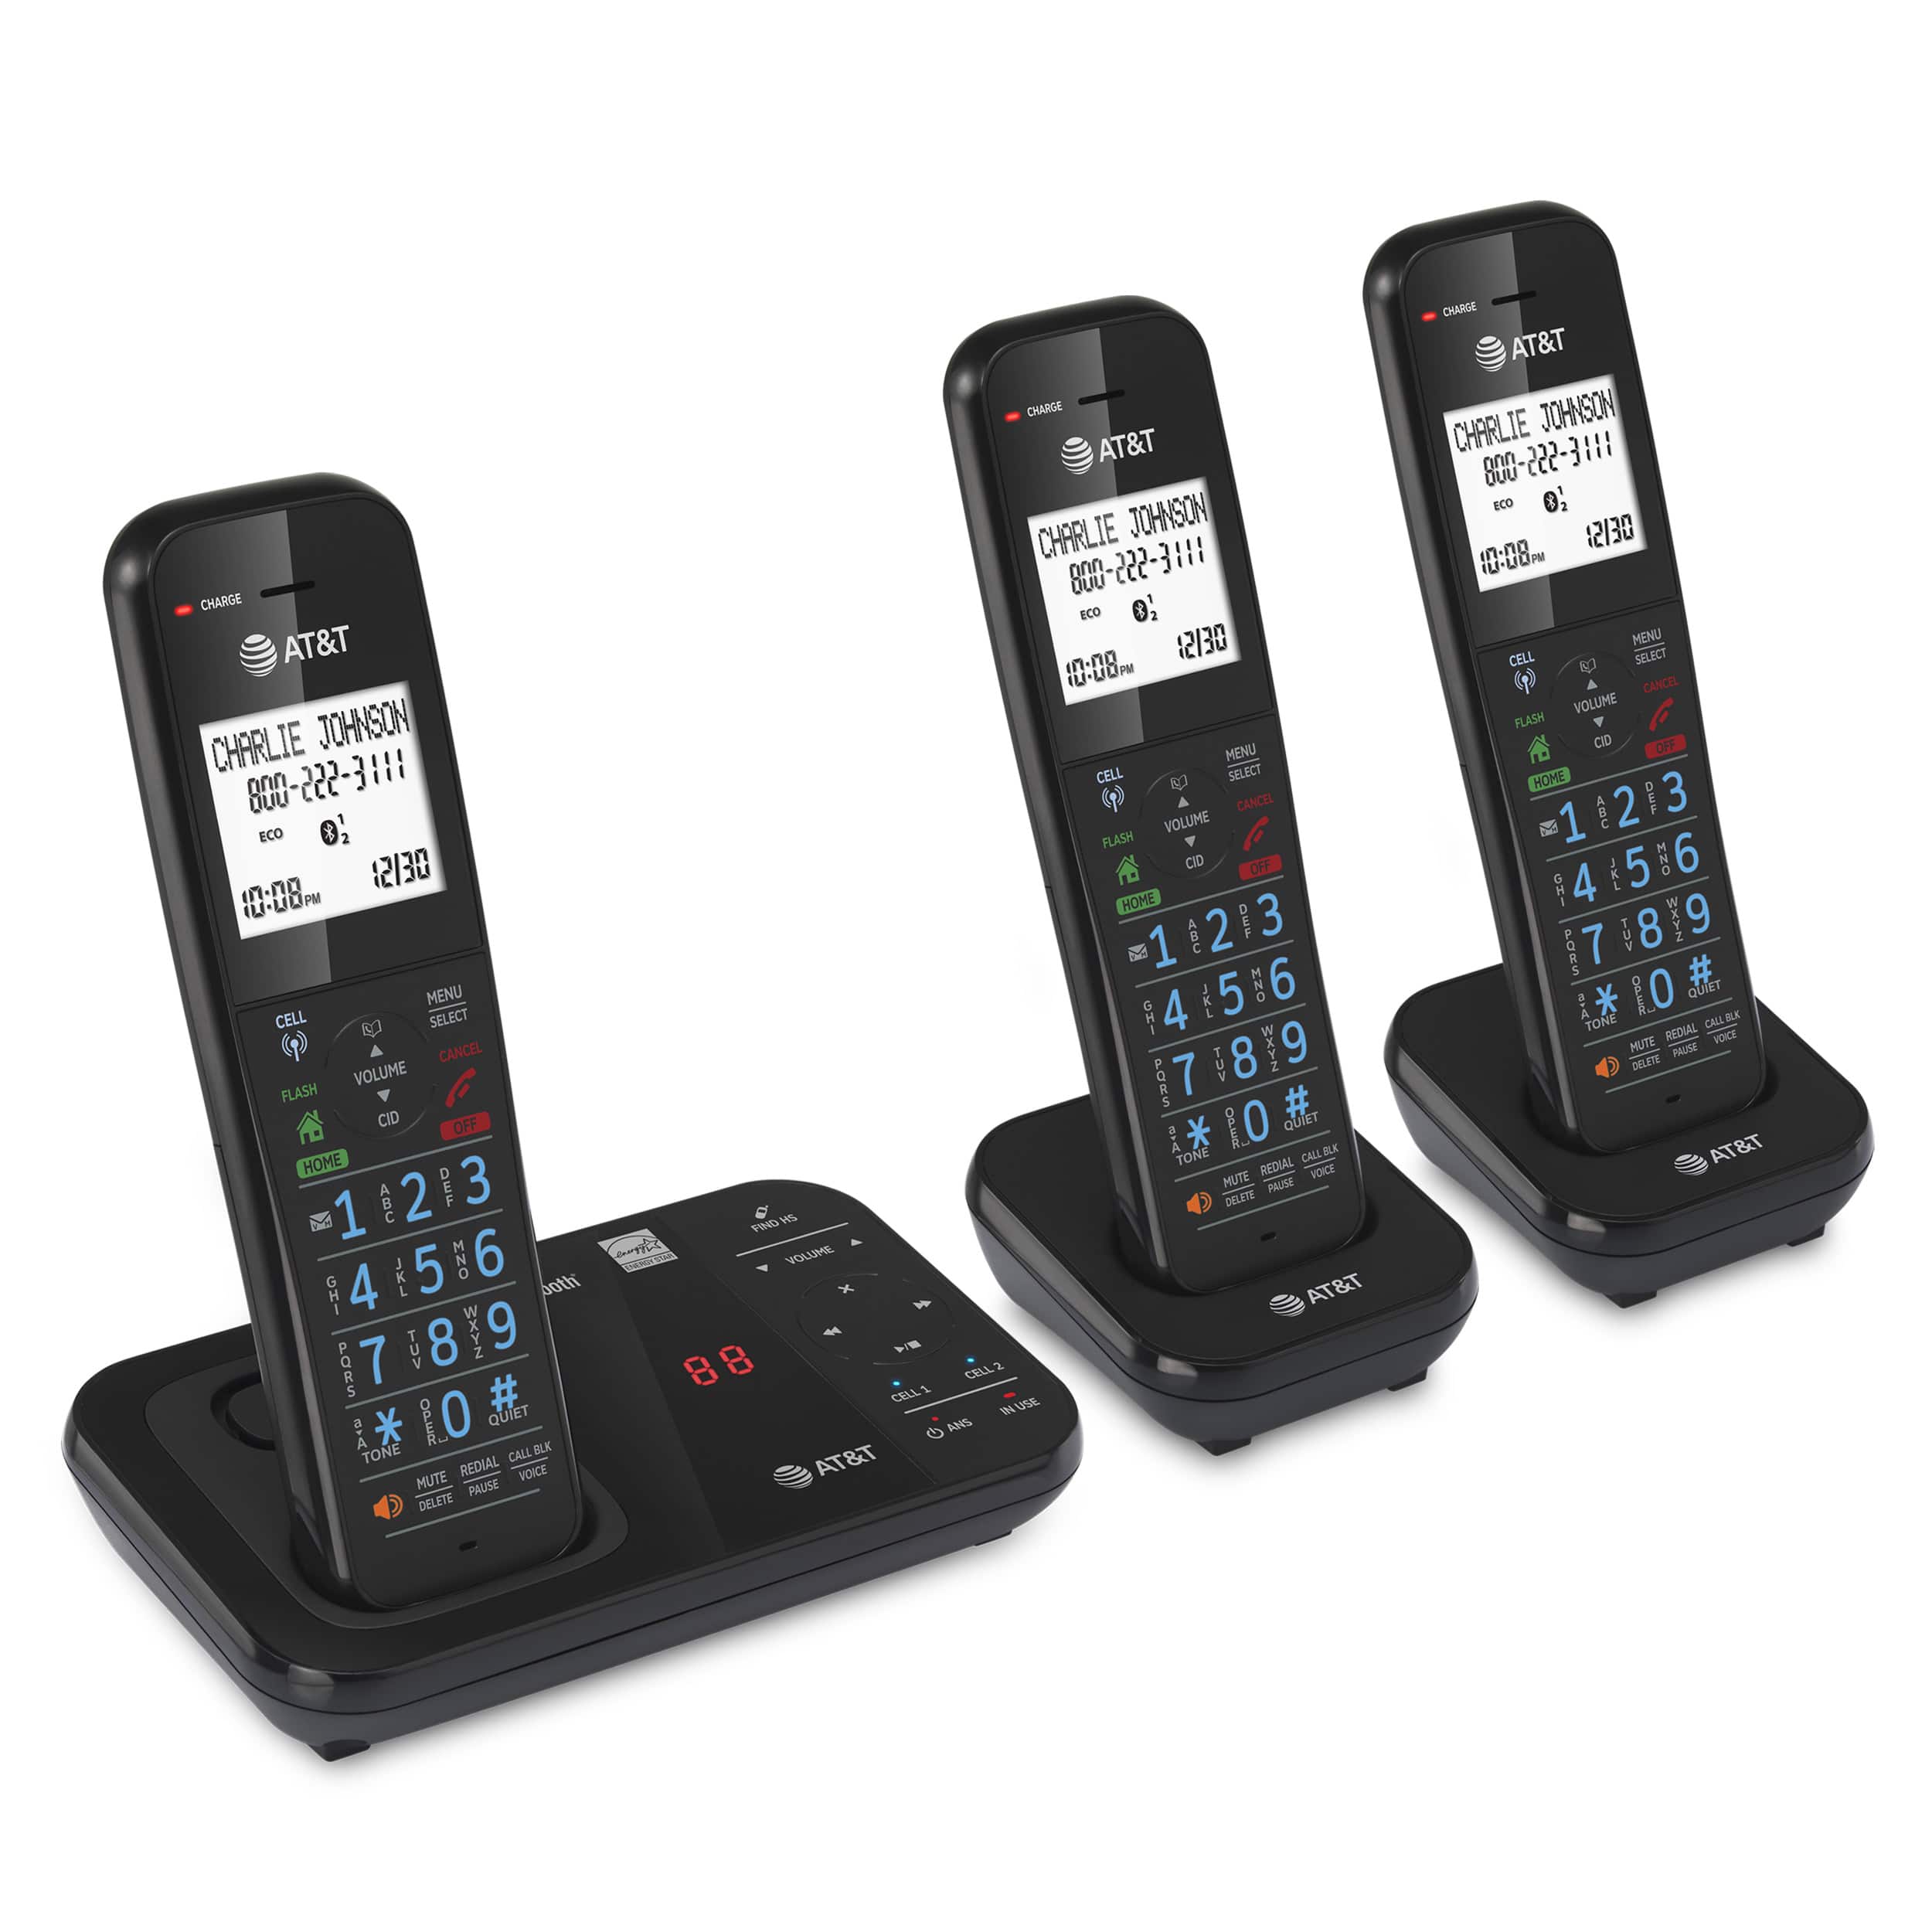 3-Handset Expandable Antibacterial Plastic Cordless Phone with Bluetooth Connect to Cell, Smart Call Blocker and Answering System - view 2